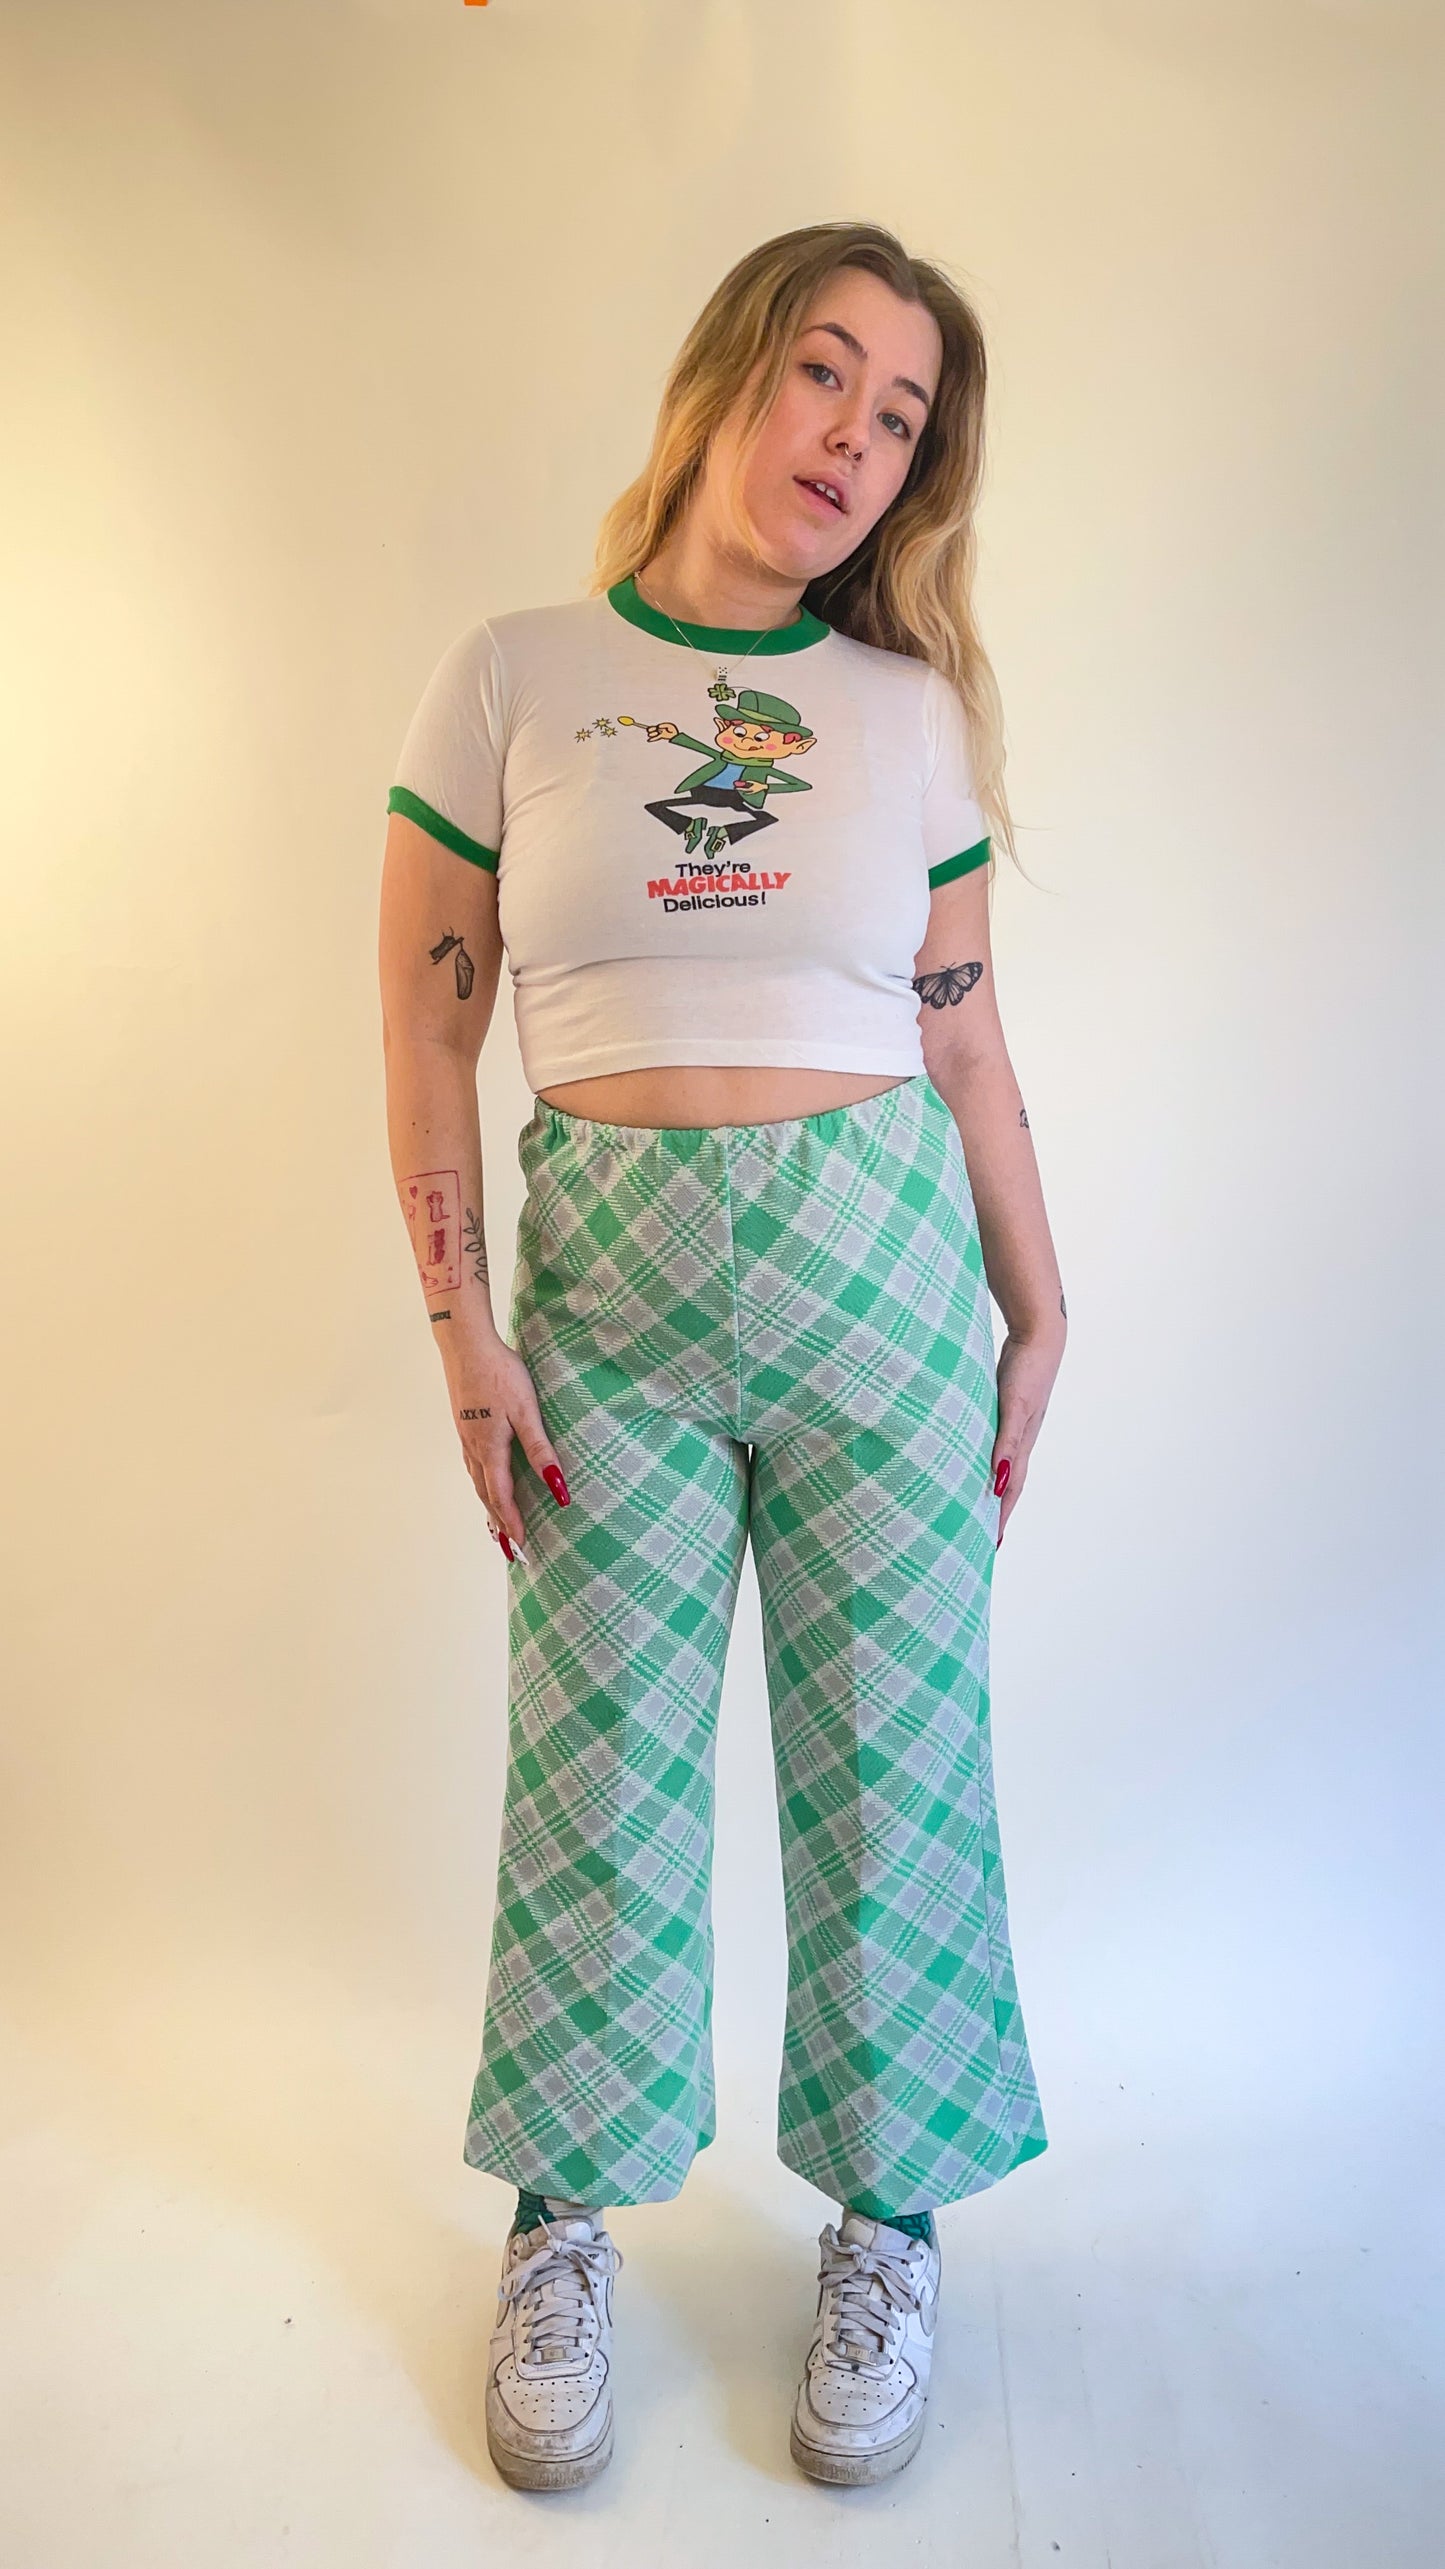 70s Lucky Charms Cropped Ringer Tee (XS/S)